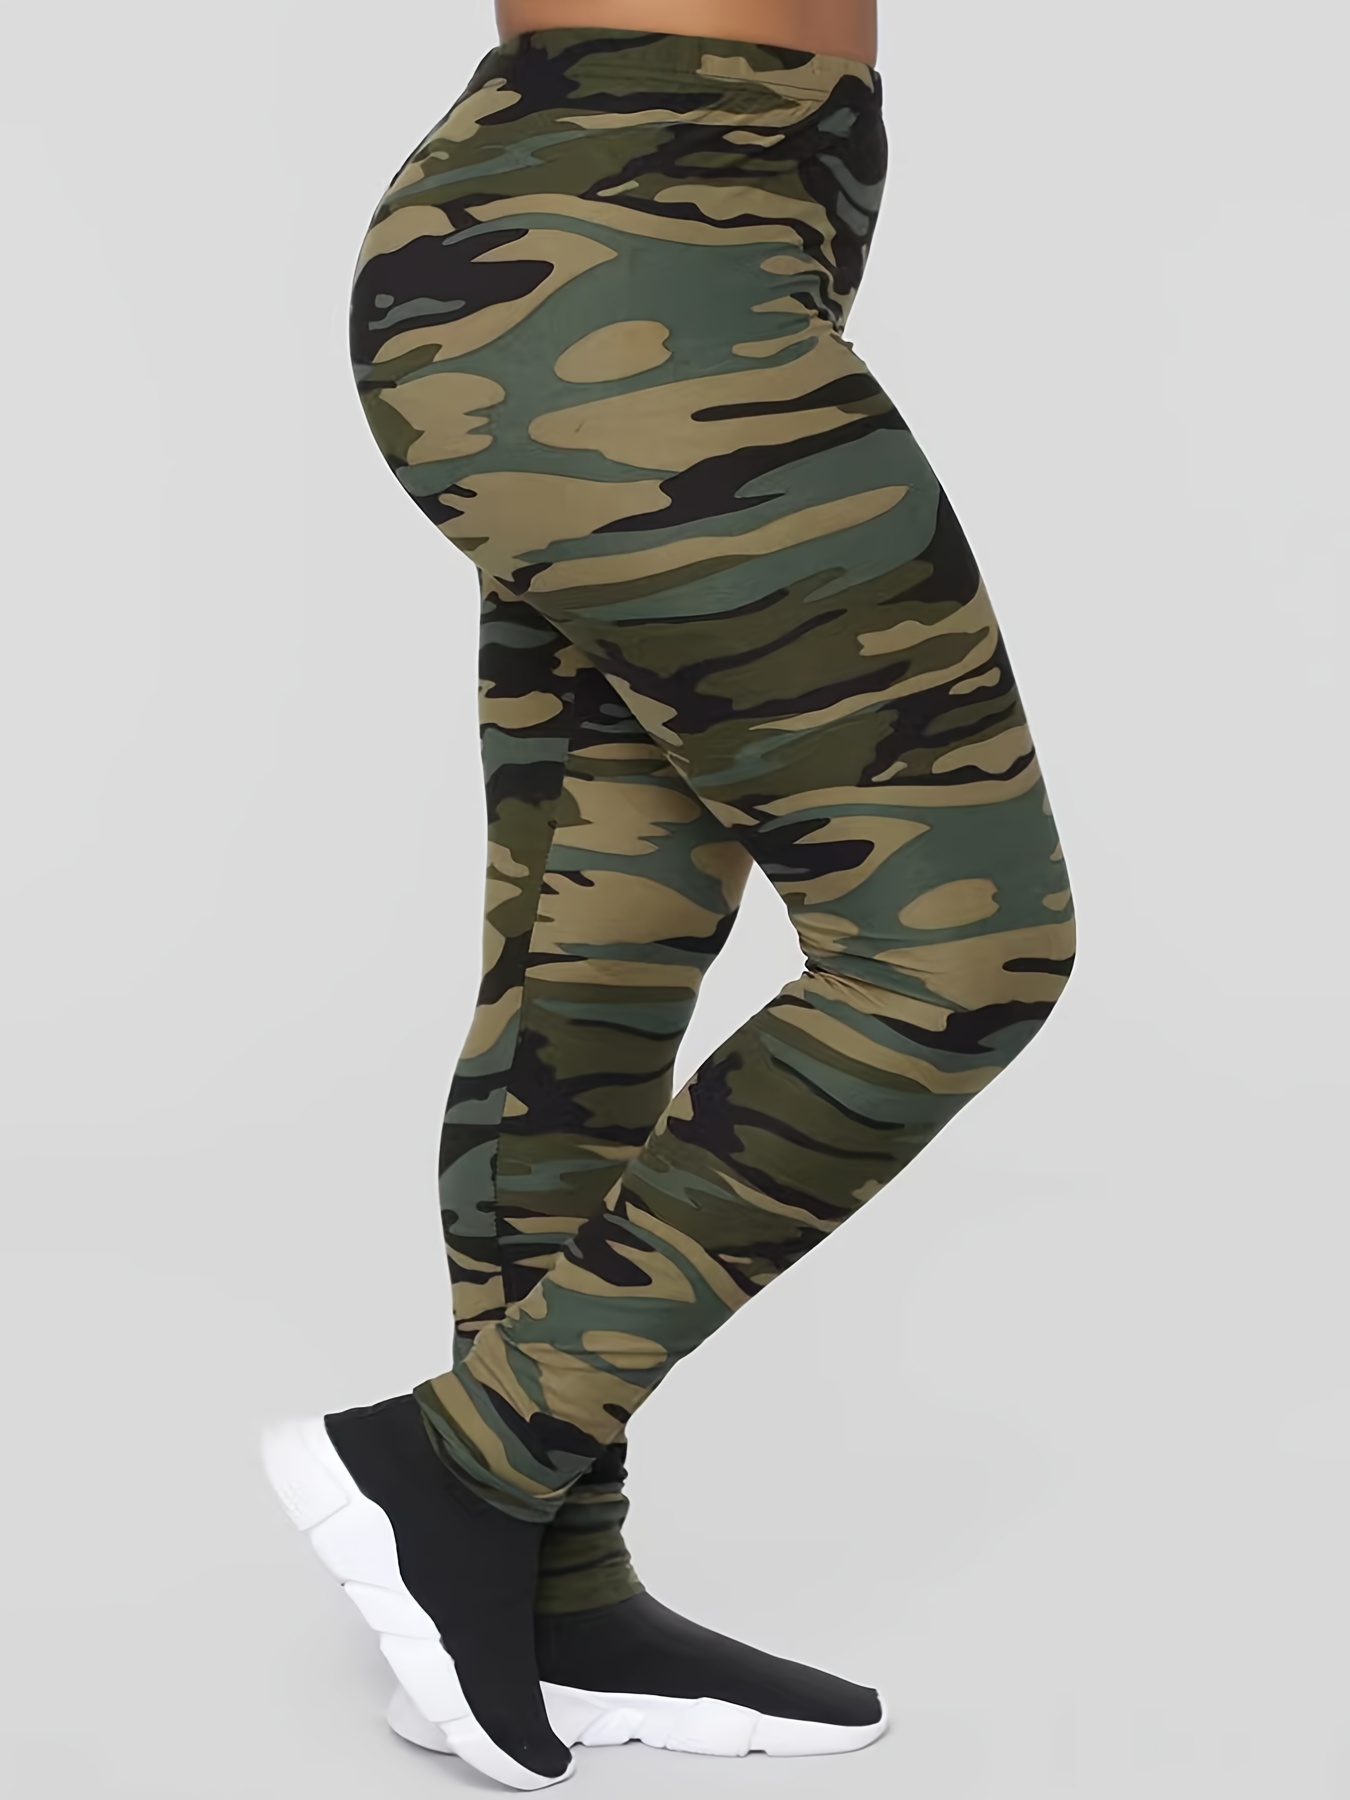 ARMY GREEN LEGGING FOR WOMEN ( small to 4xl )